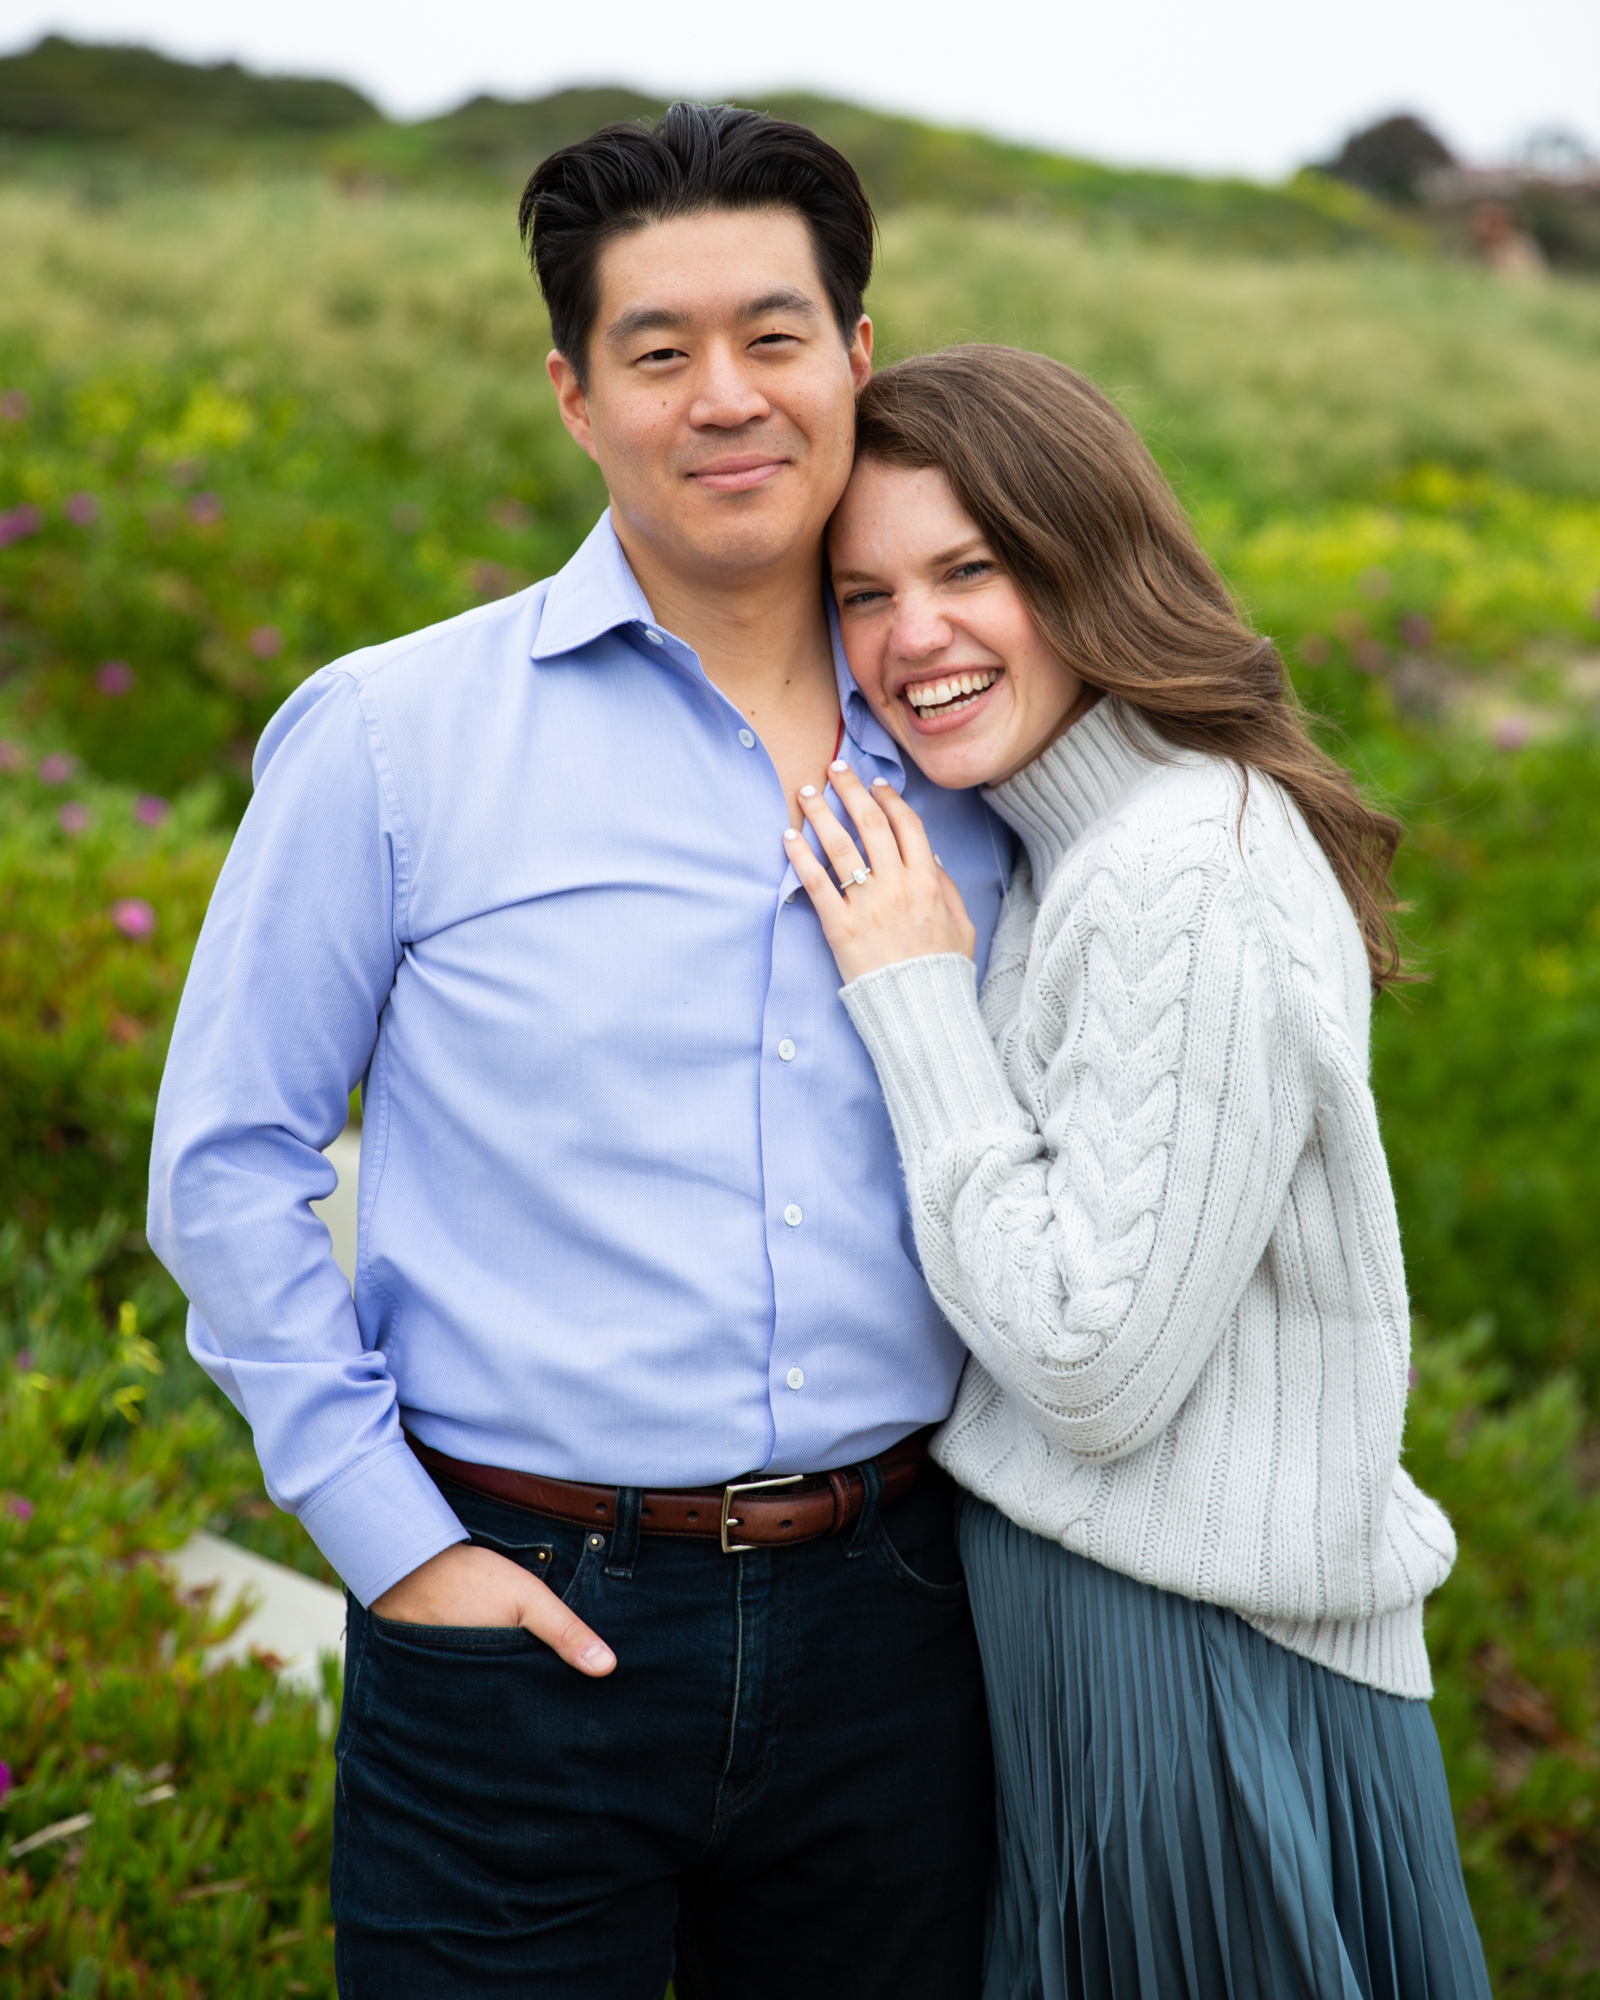 will rogers state beach engagement photography